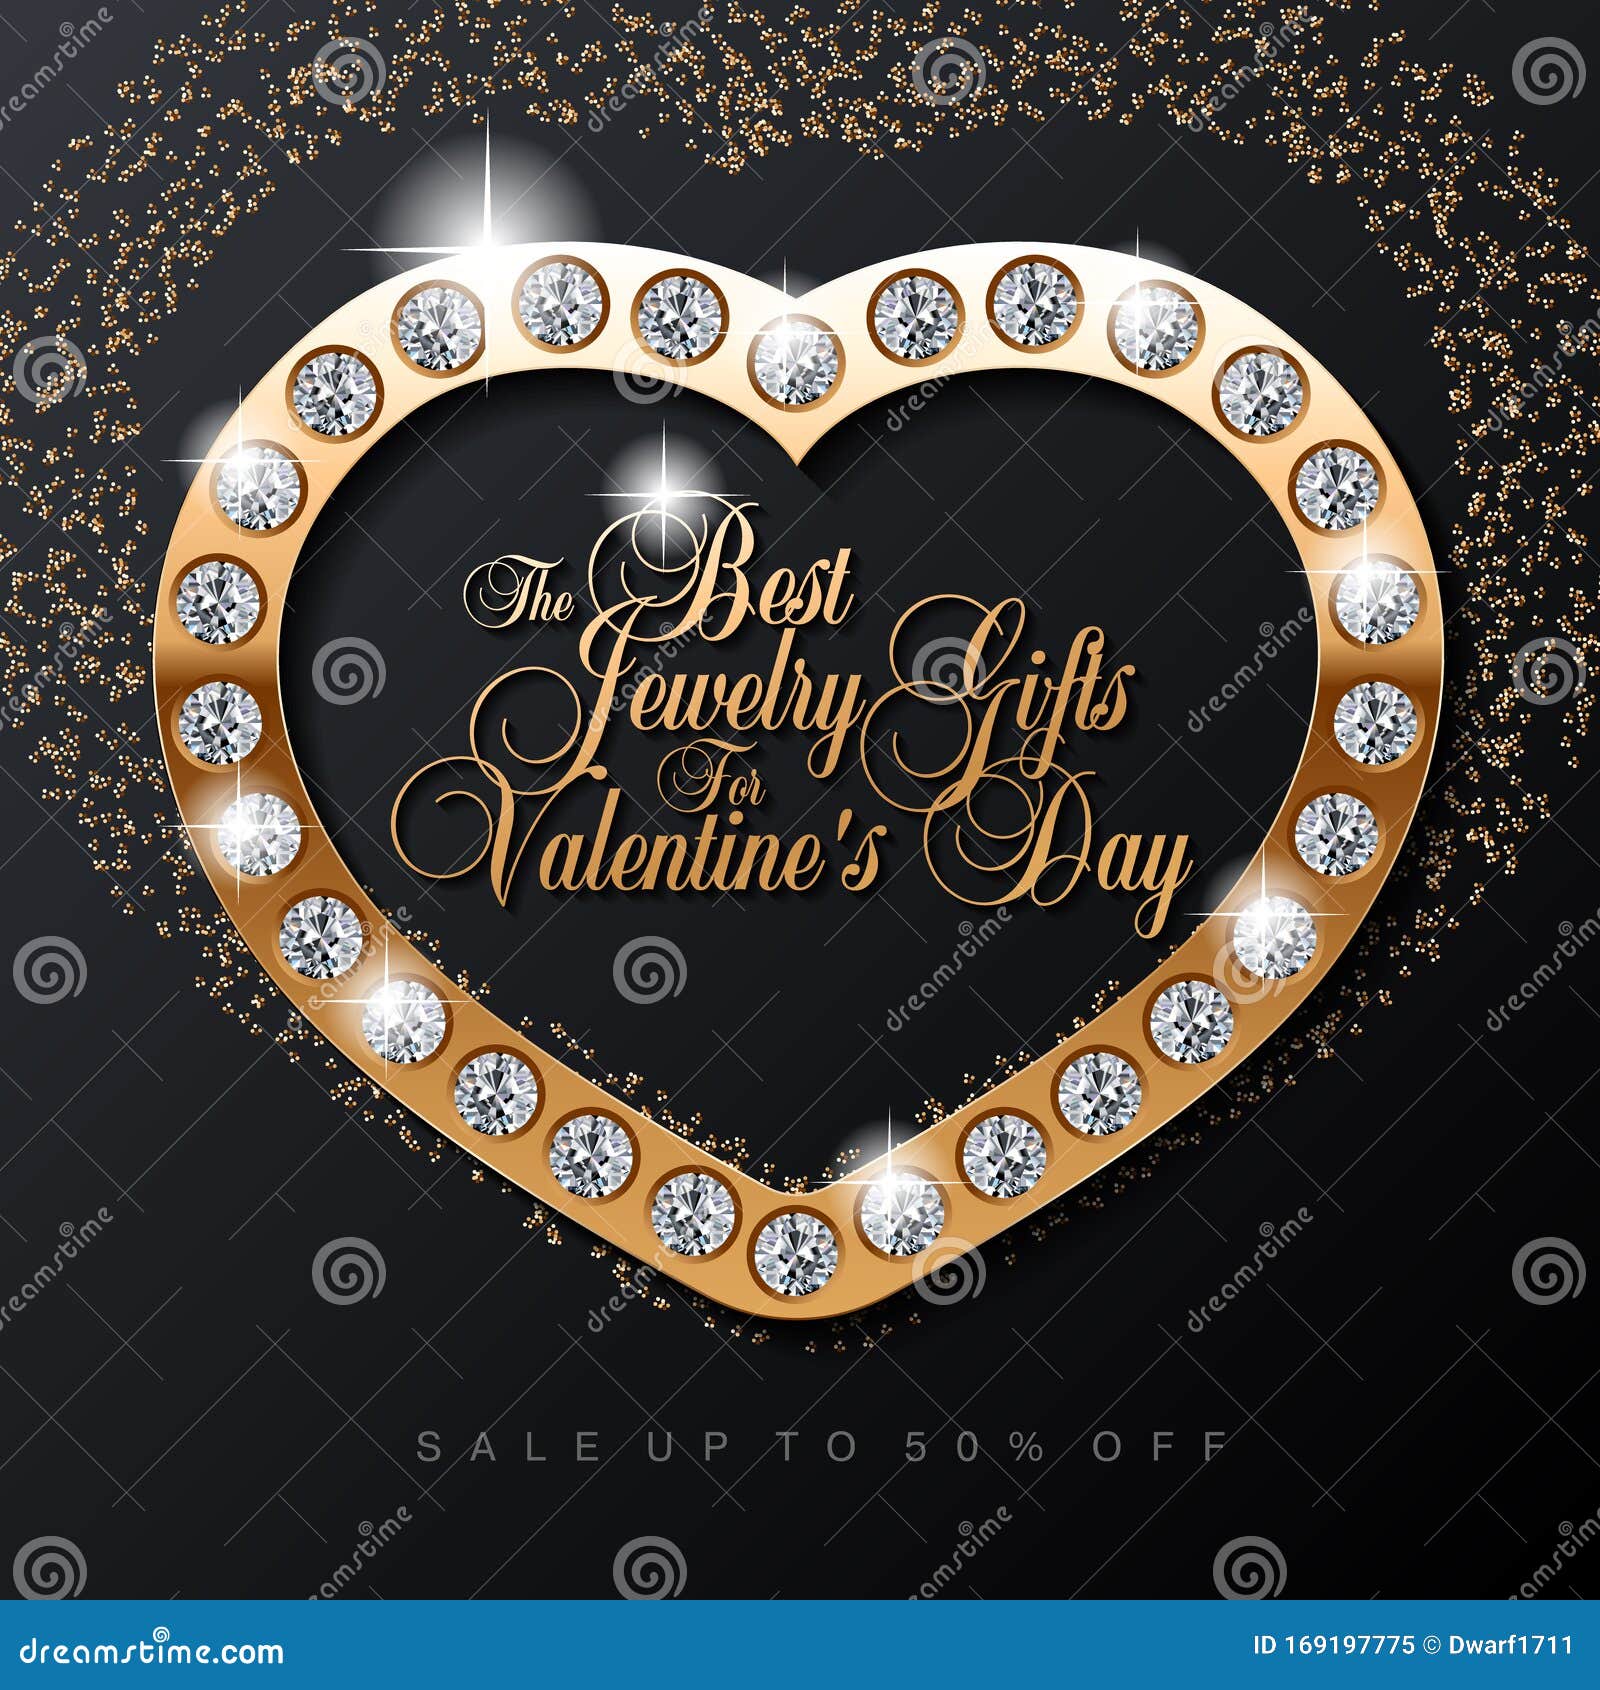 Luxury Valentines Day Jewelry Sale, Special Offer ...